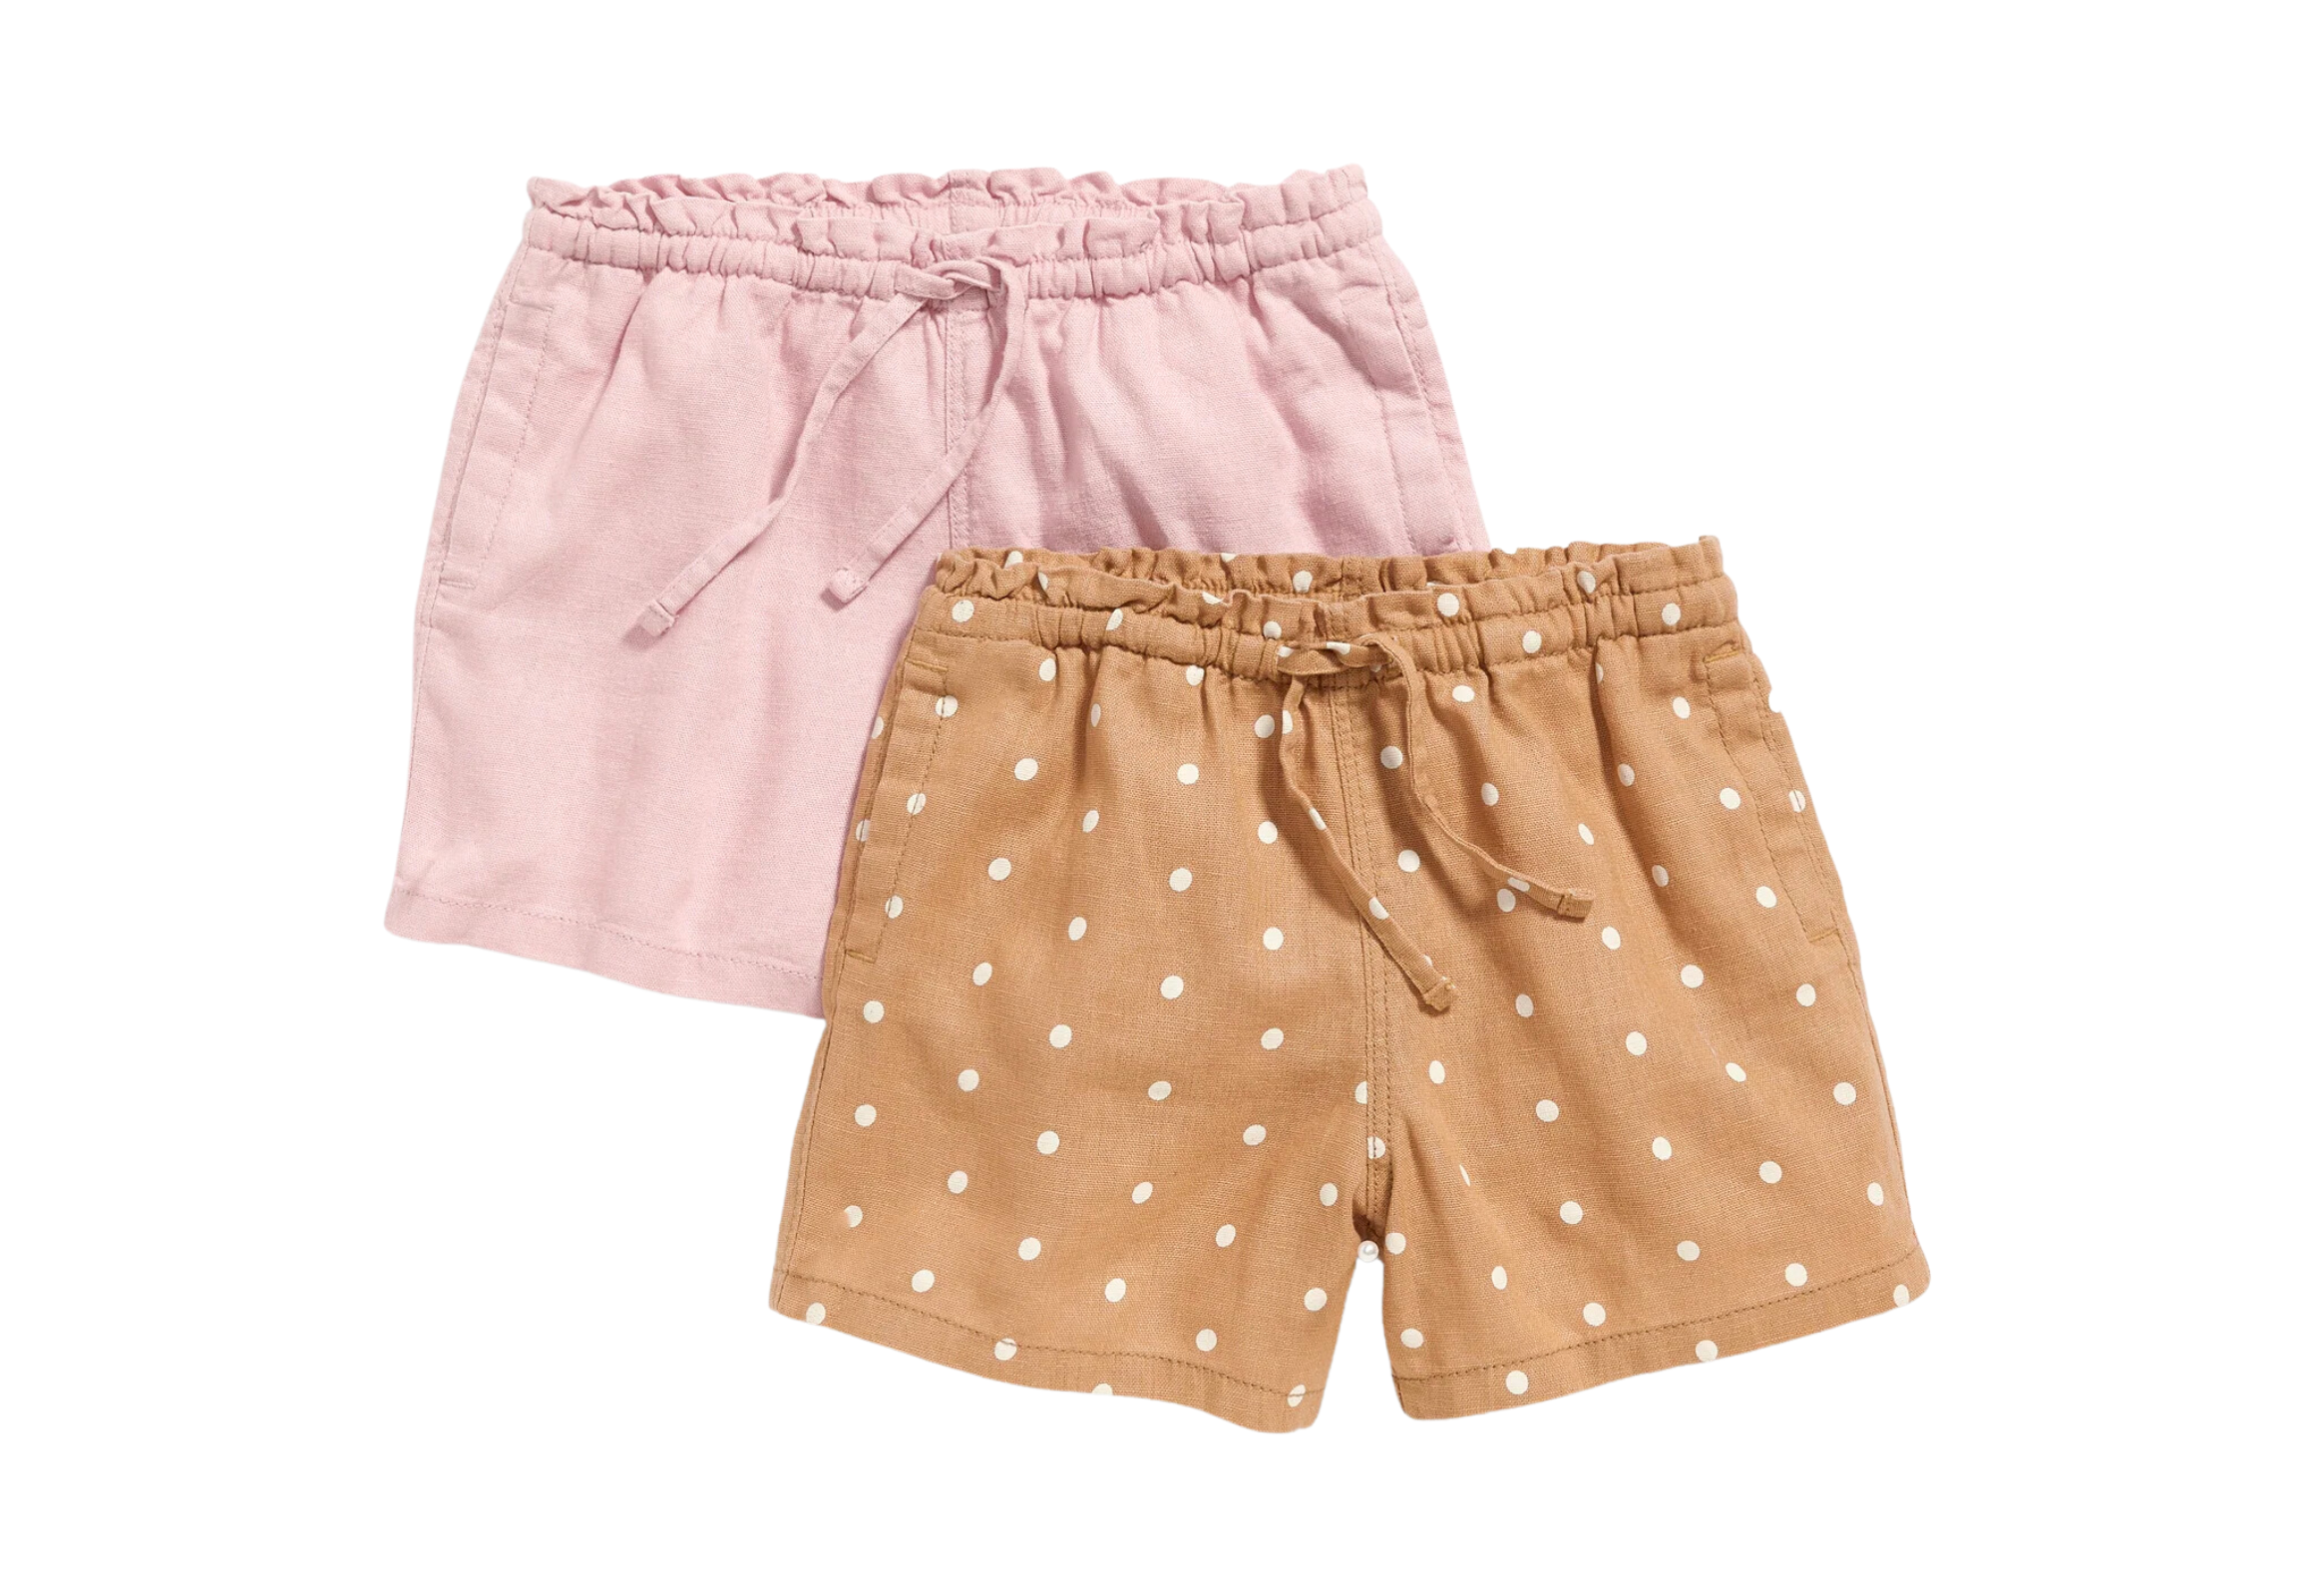 Toddler's Shorts 2-Pack